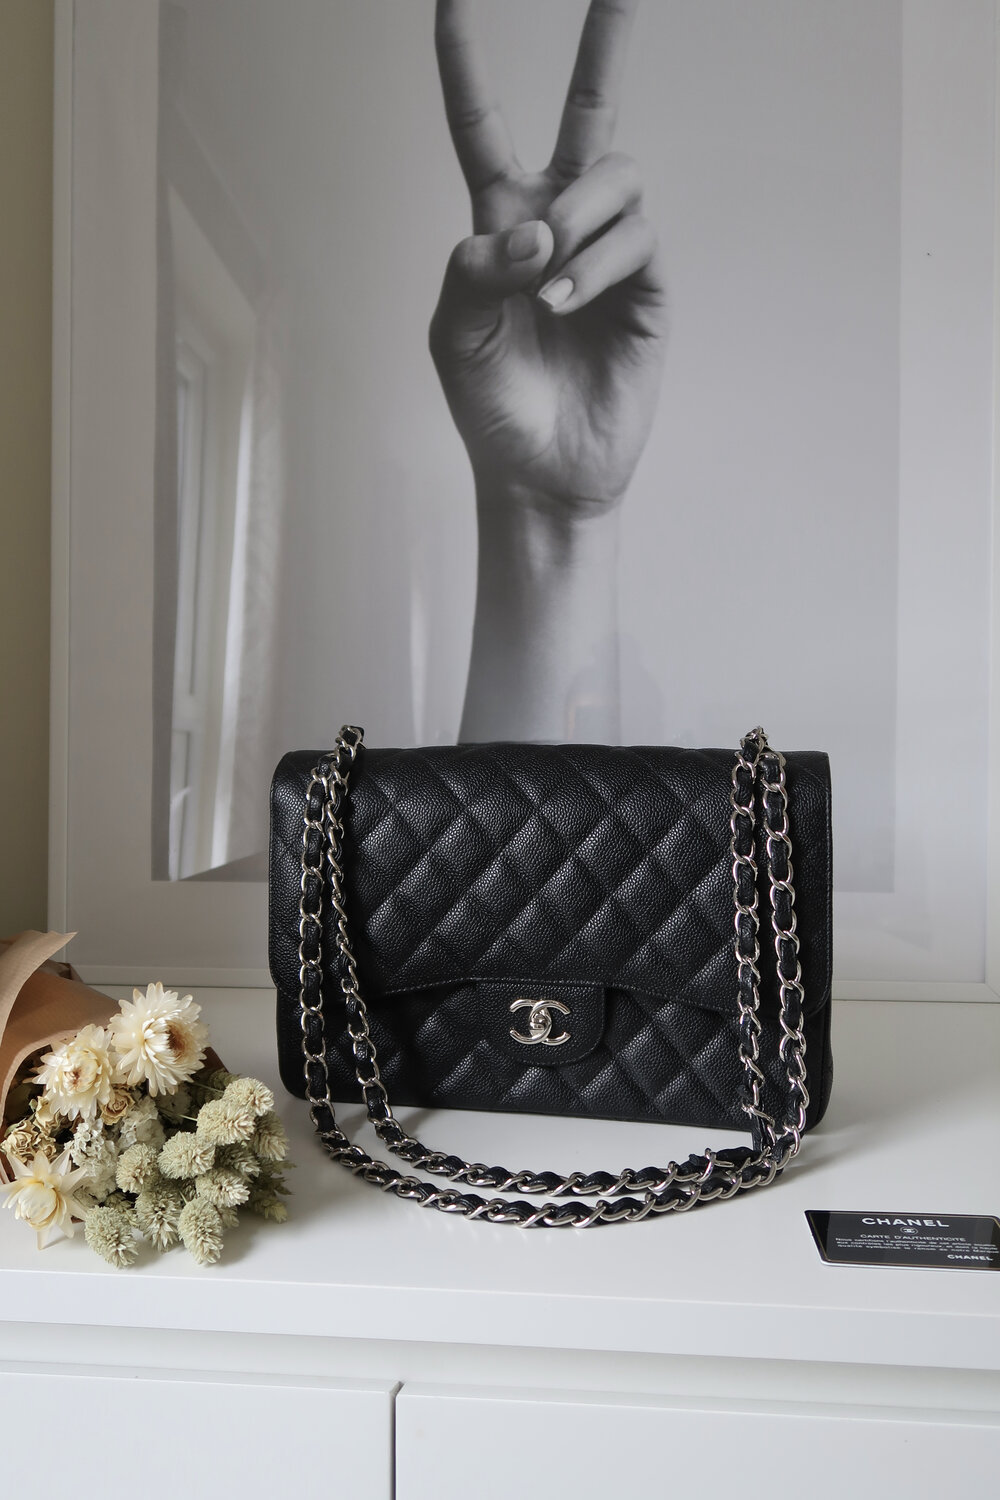 Chanel Large Black Caviar Classic Double Flap, 2015-2016 — Blaise Ruby Loves